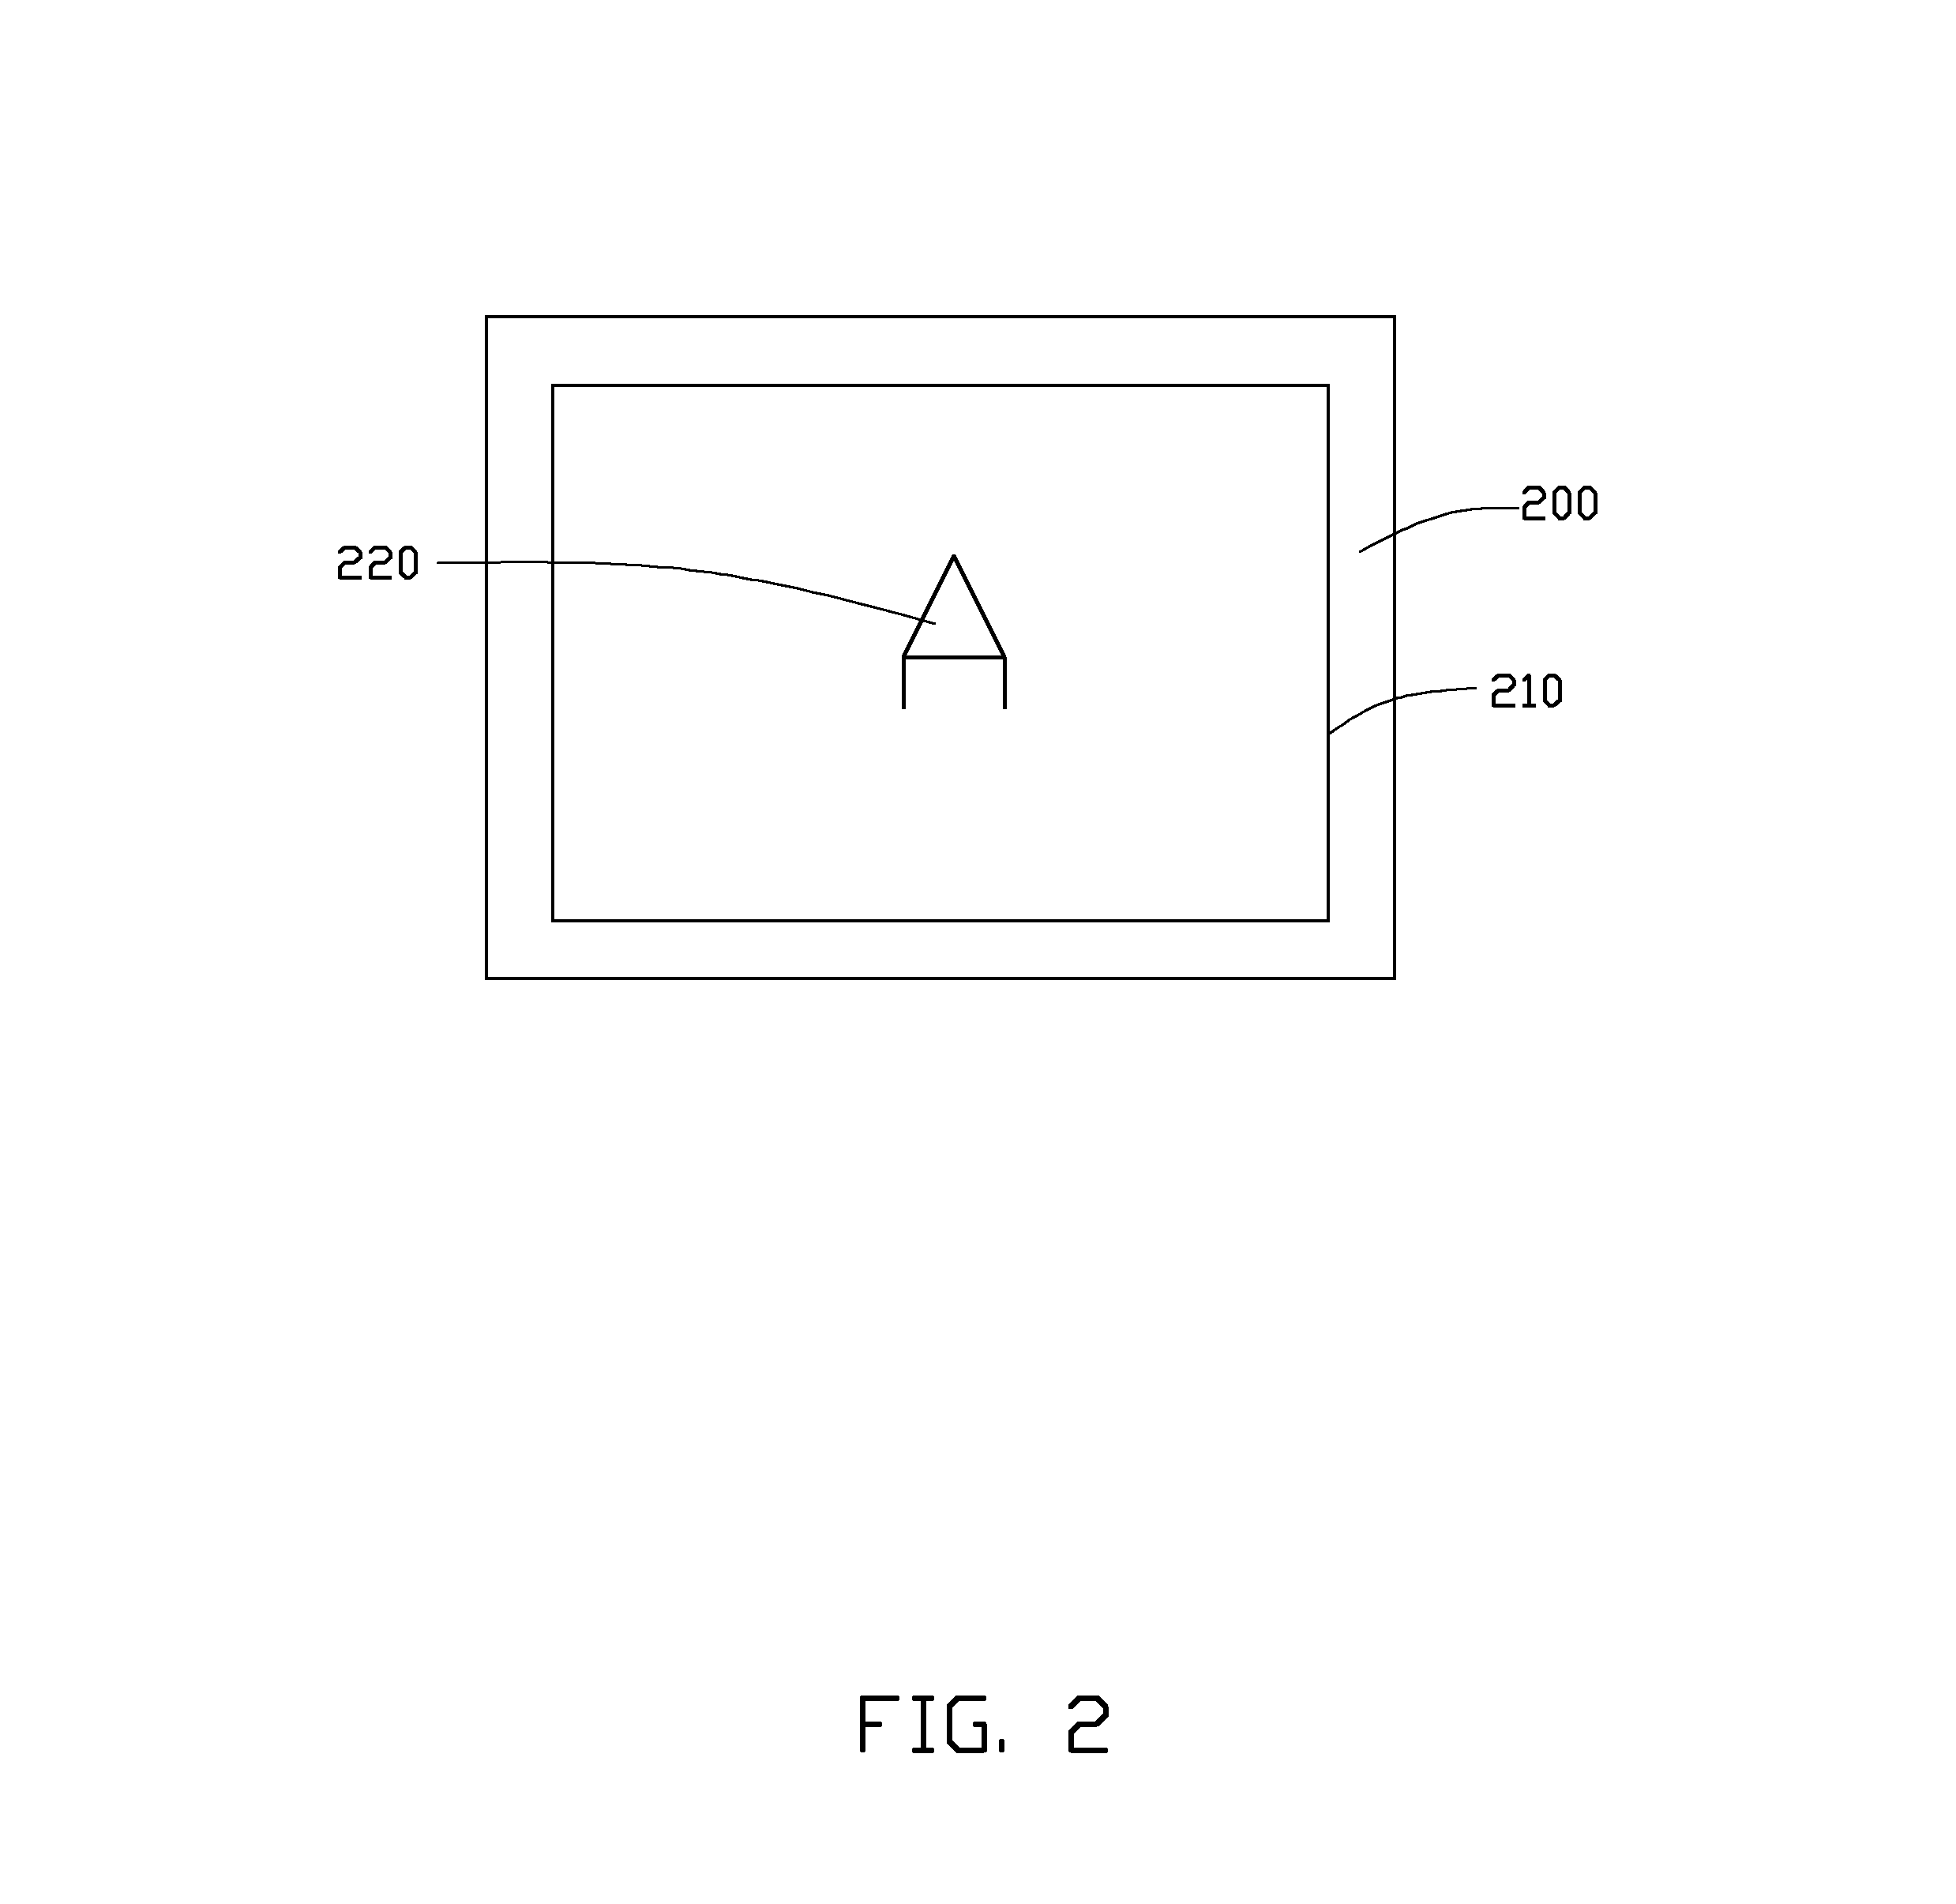 Automatic rotating display system based on windows operating system